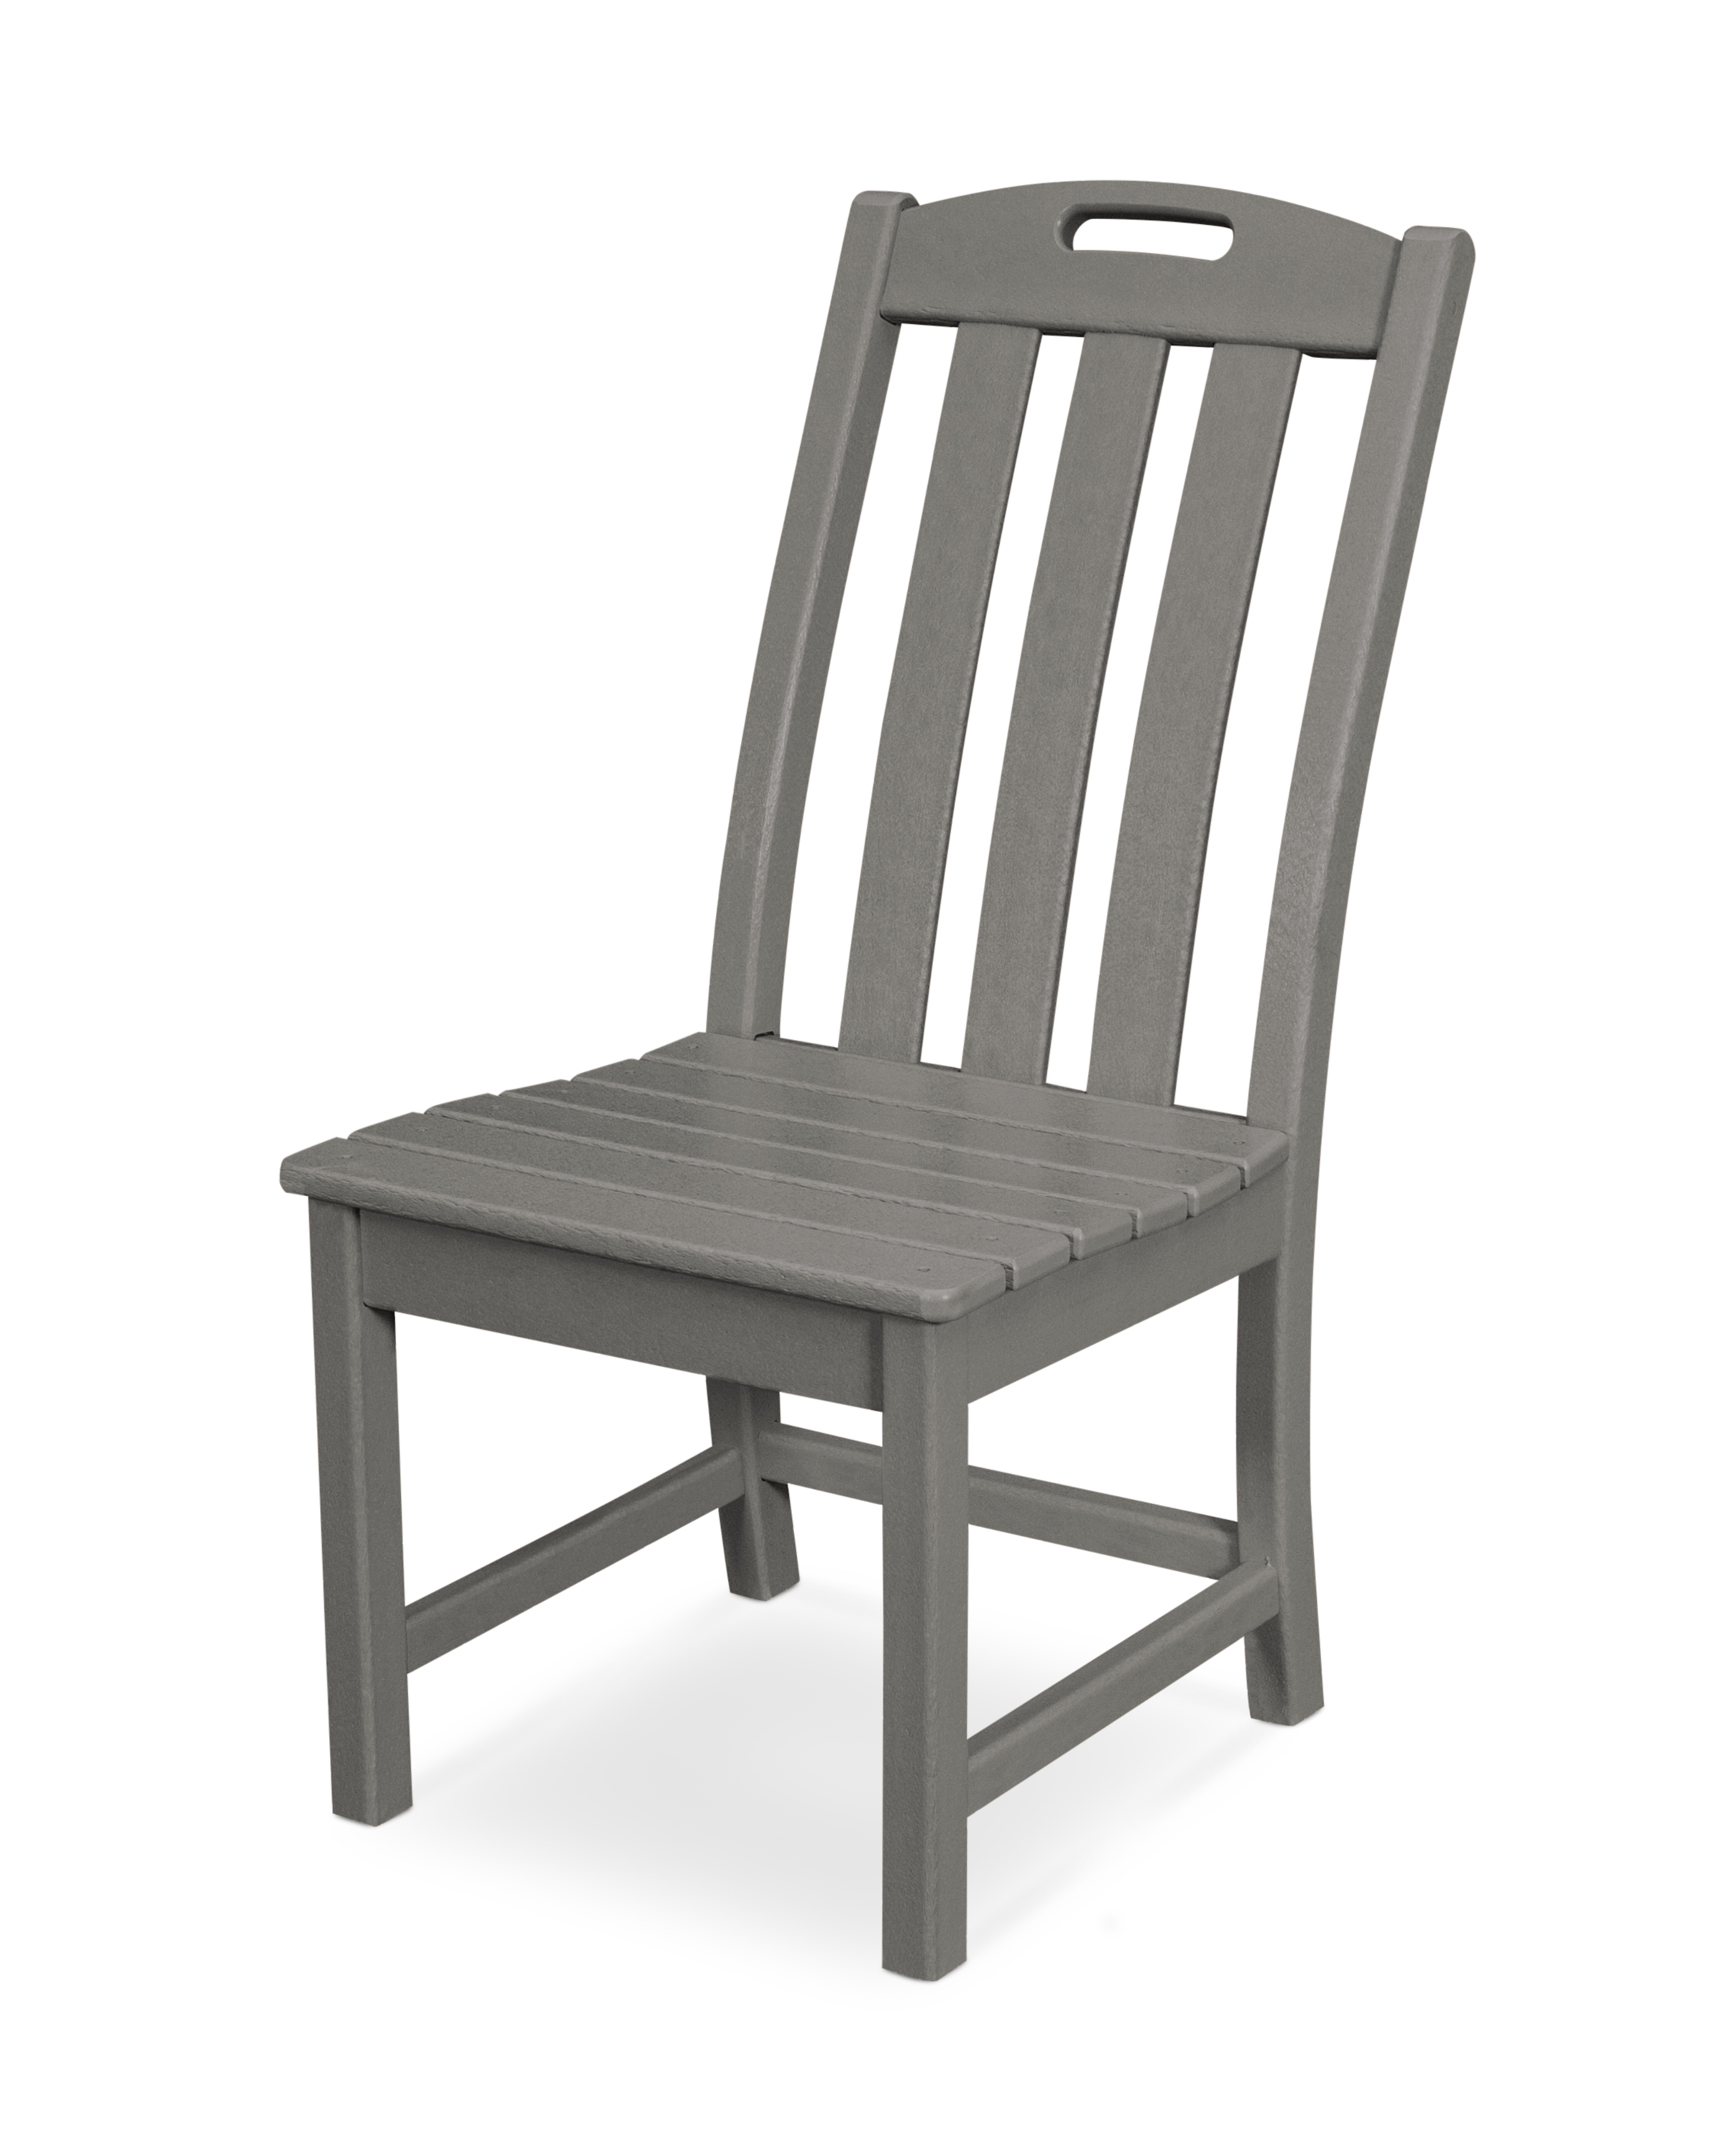 TrexÂ® Outdoor Furnitureâ„¢ Yacht Club Dining Side Chair